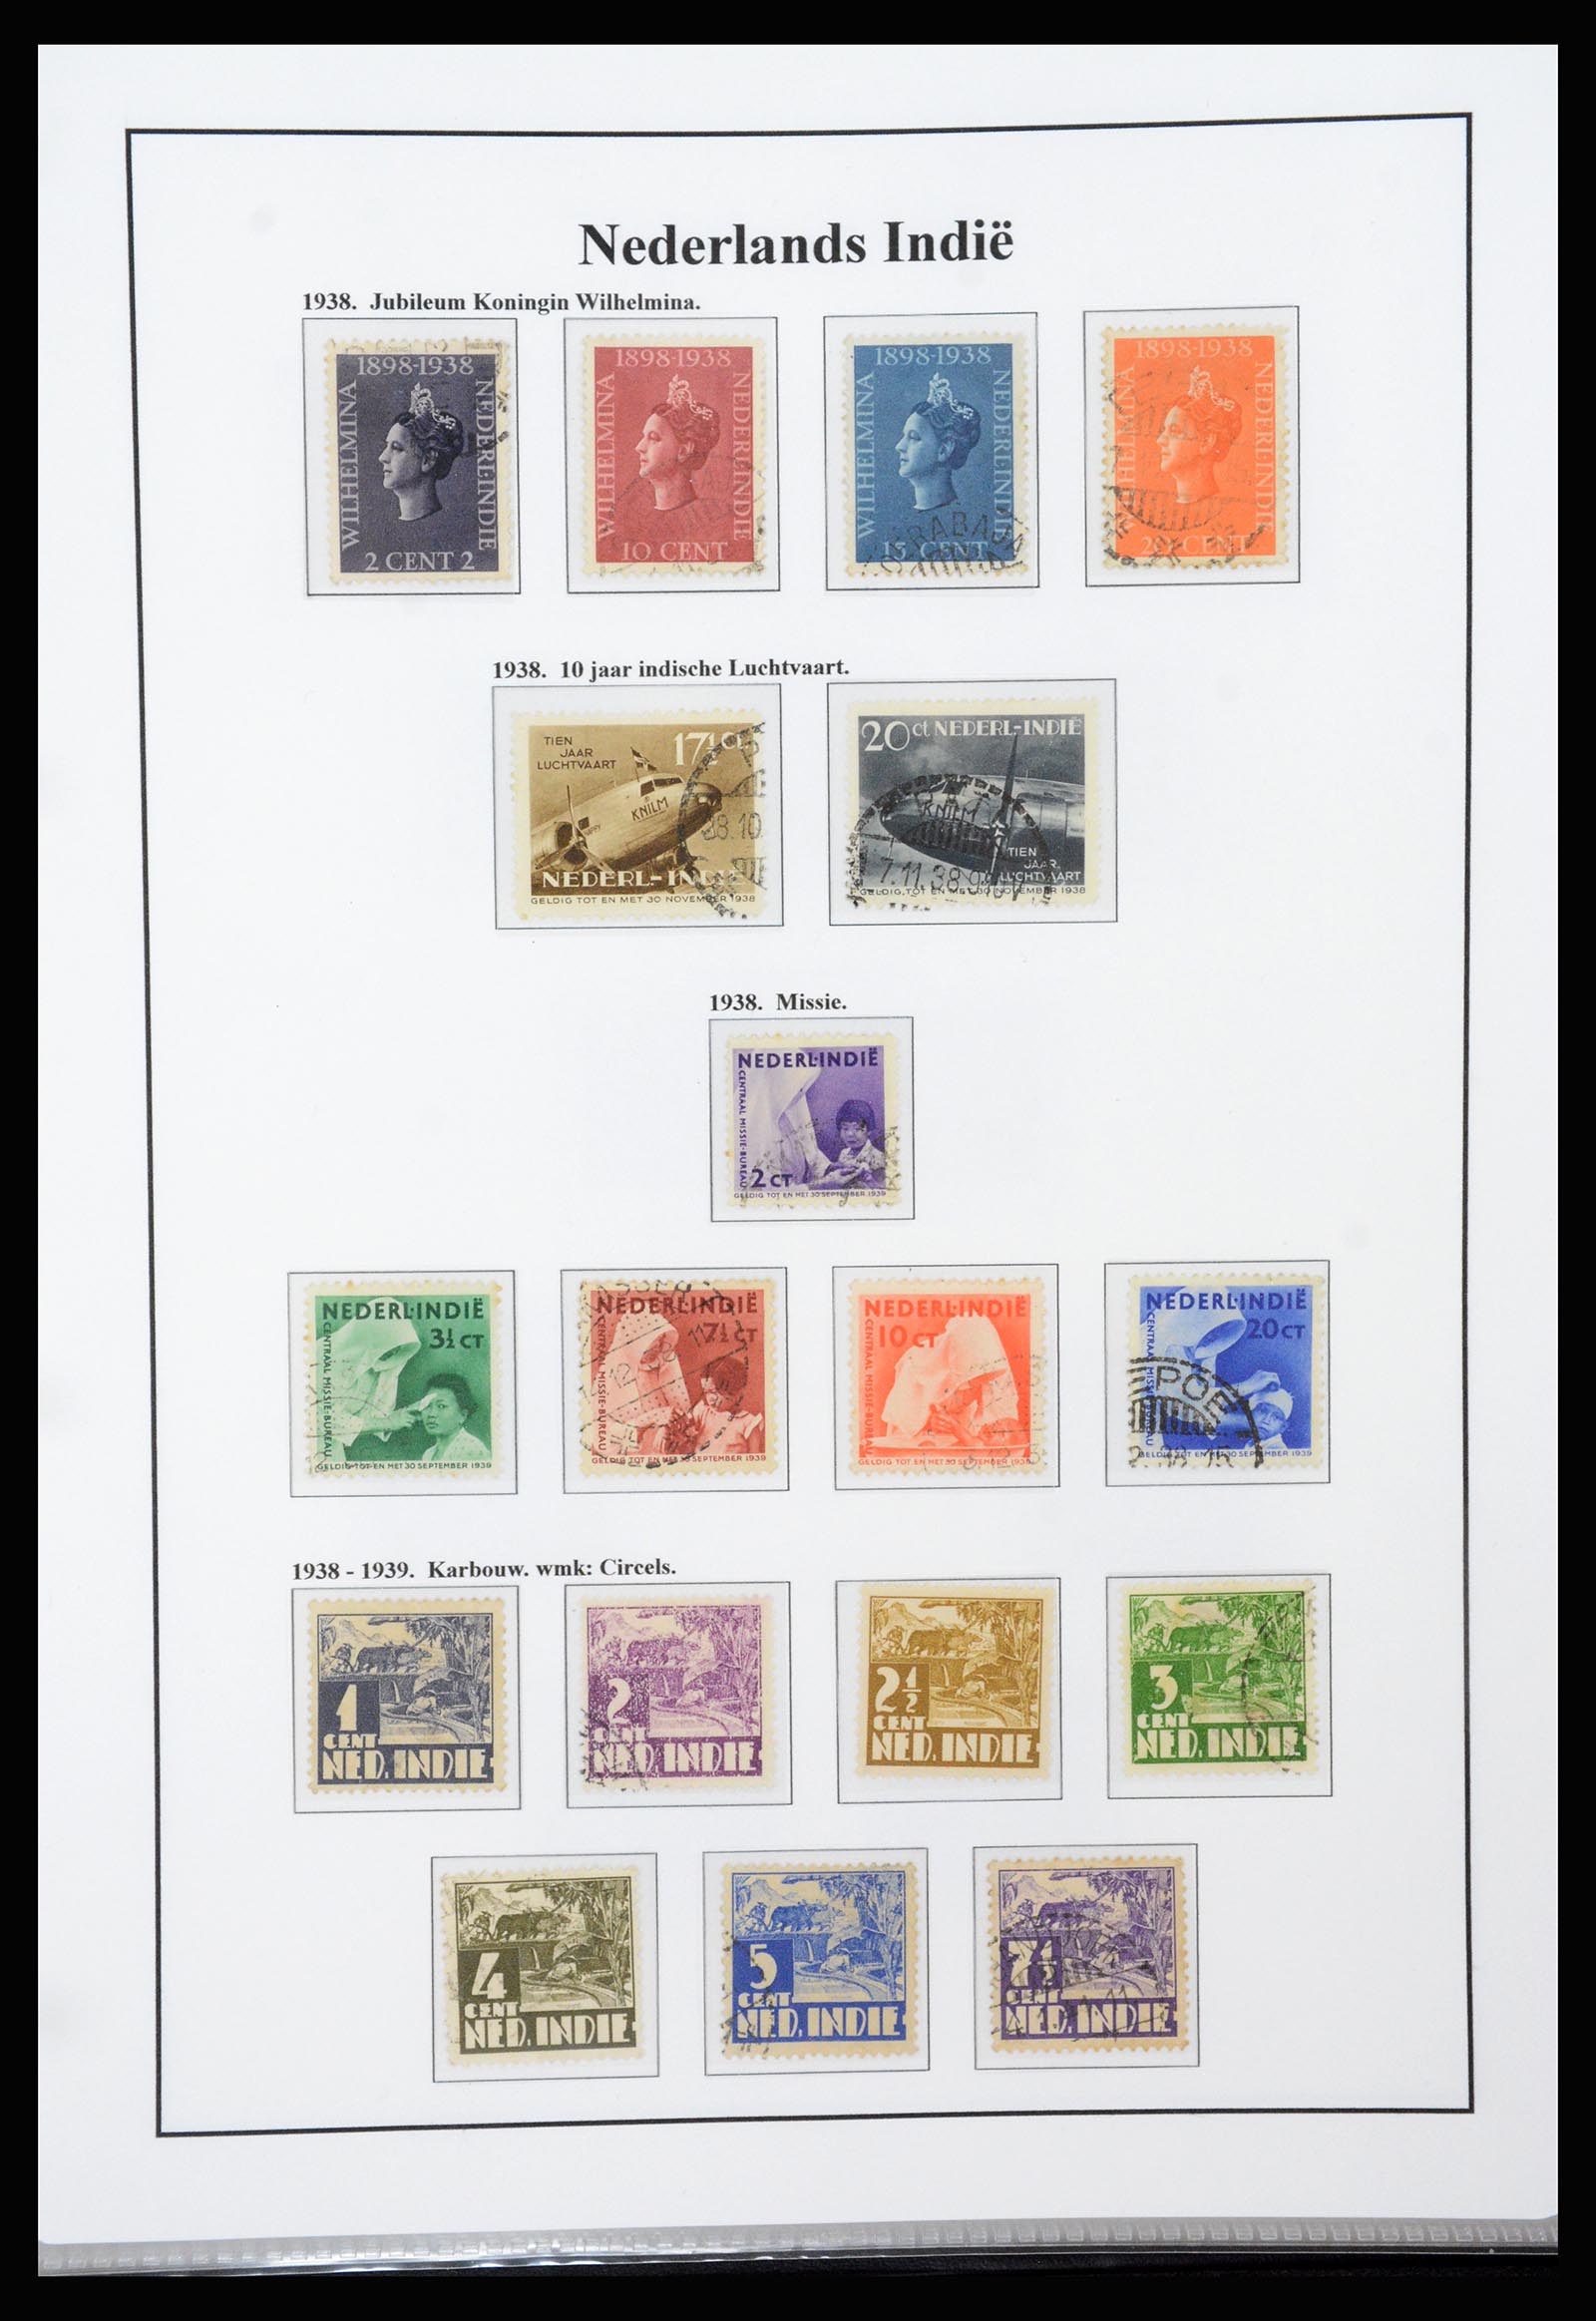 37247 020 - Stamp collection 37247 Dutch east Indies 1864-1949.